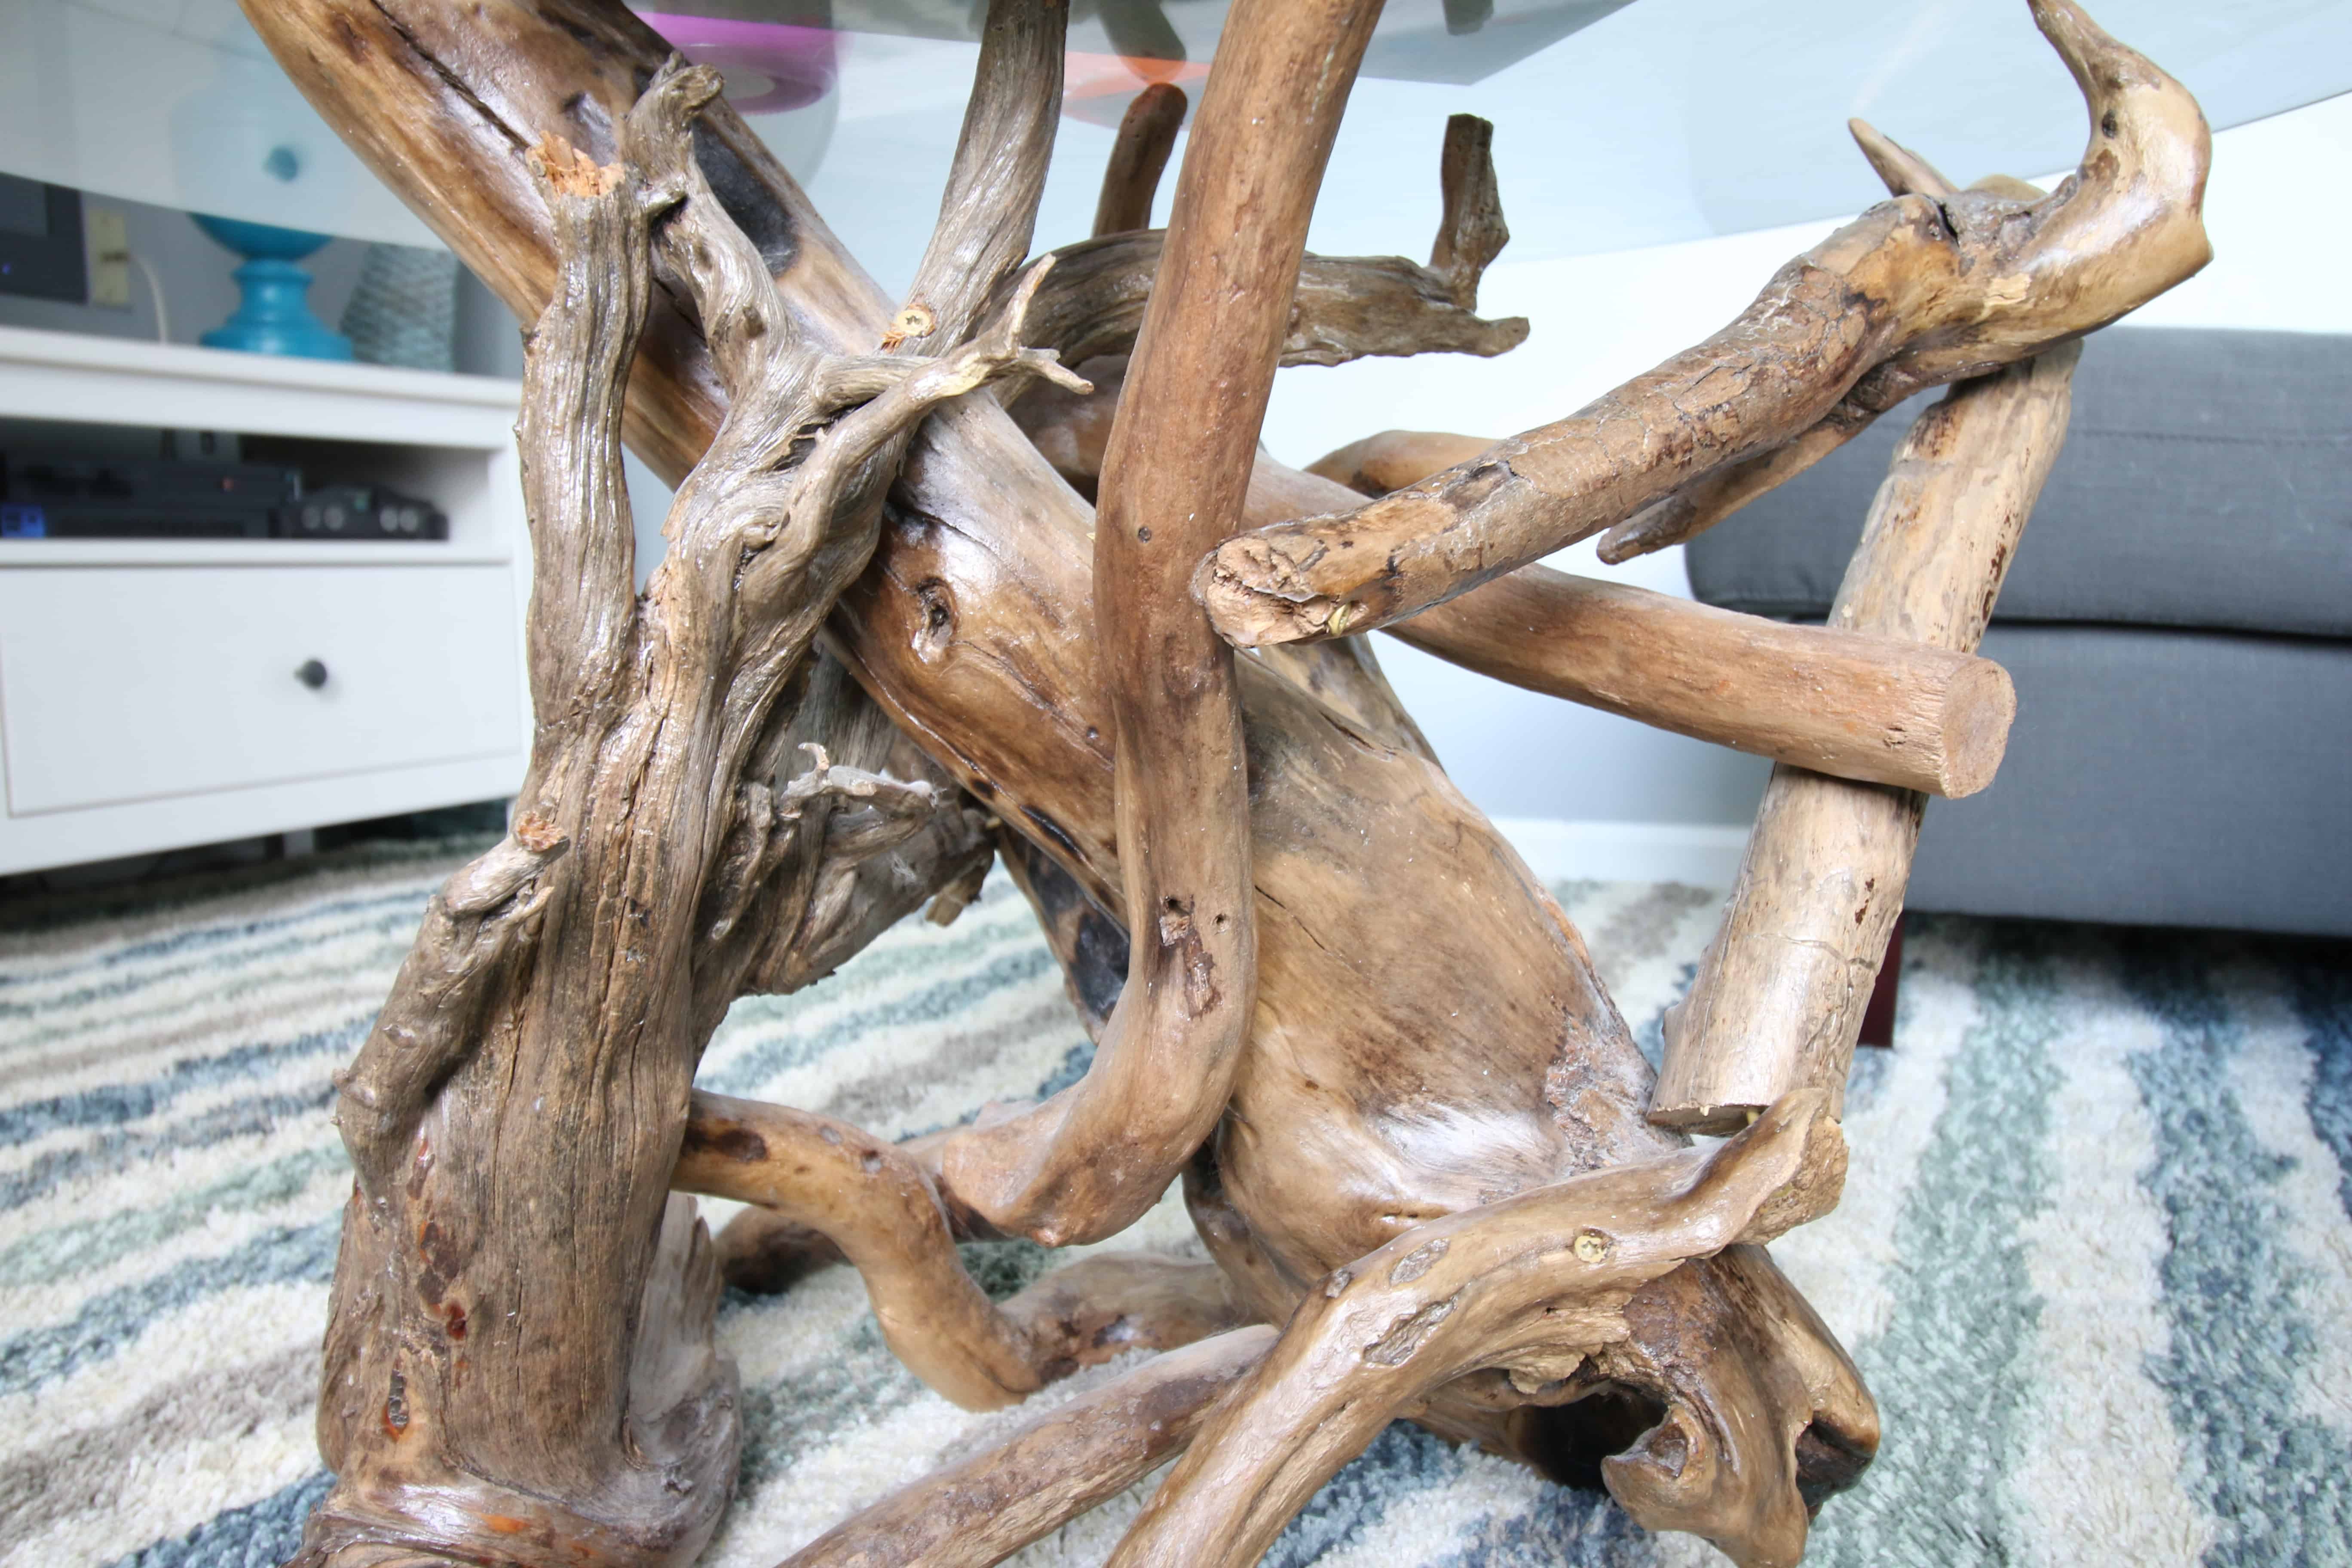 How To Make A Diy Driftwood Coffee Table, How To Make A Table From Driftwood